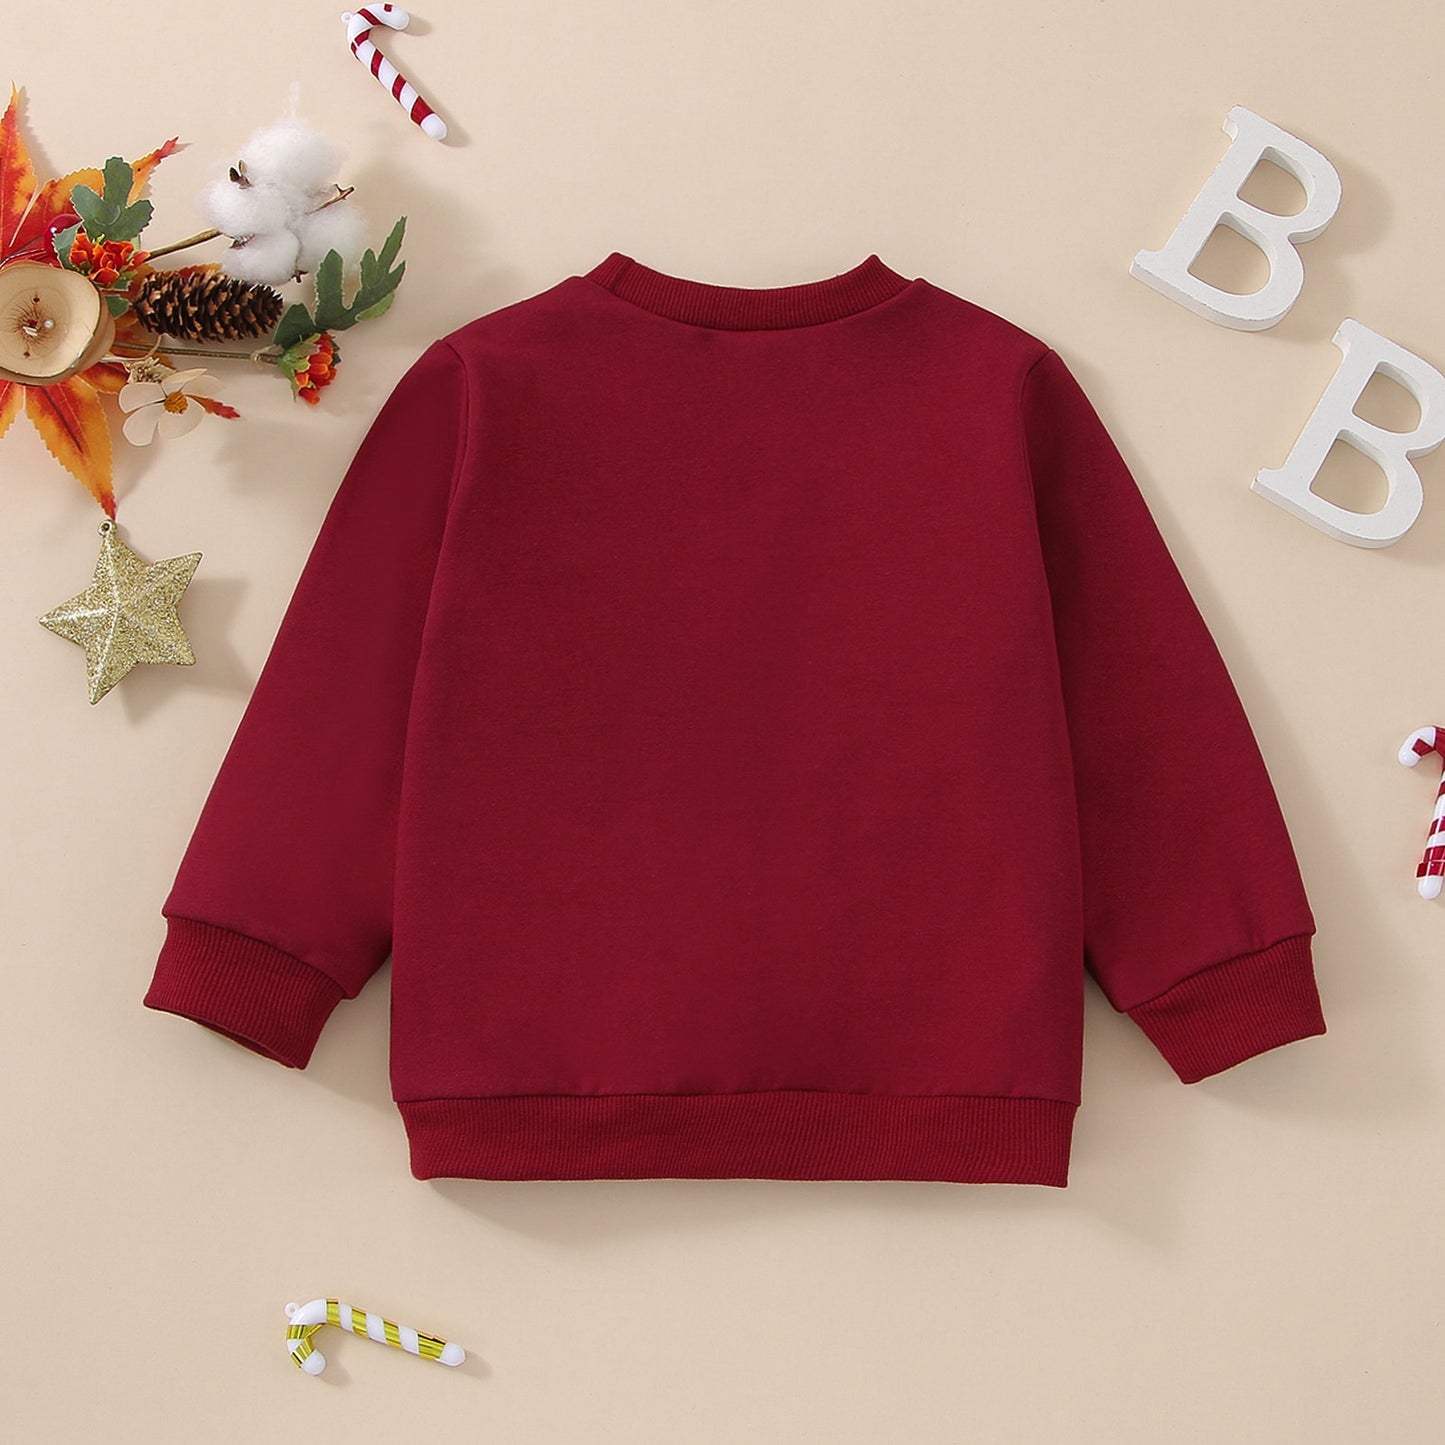 2022-10-17 Lioraitiin 0-24M Infant Baby Girl Autumn Sweatshirts Long Sleeve Red Sorry Santa I Drank The Milk Letter Printed Top